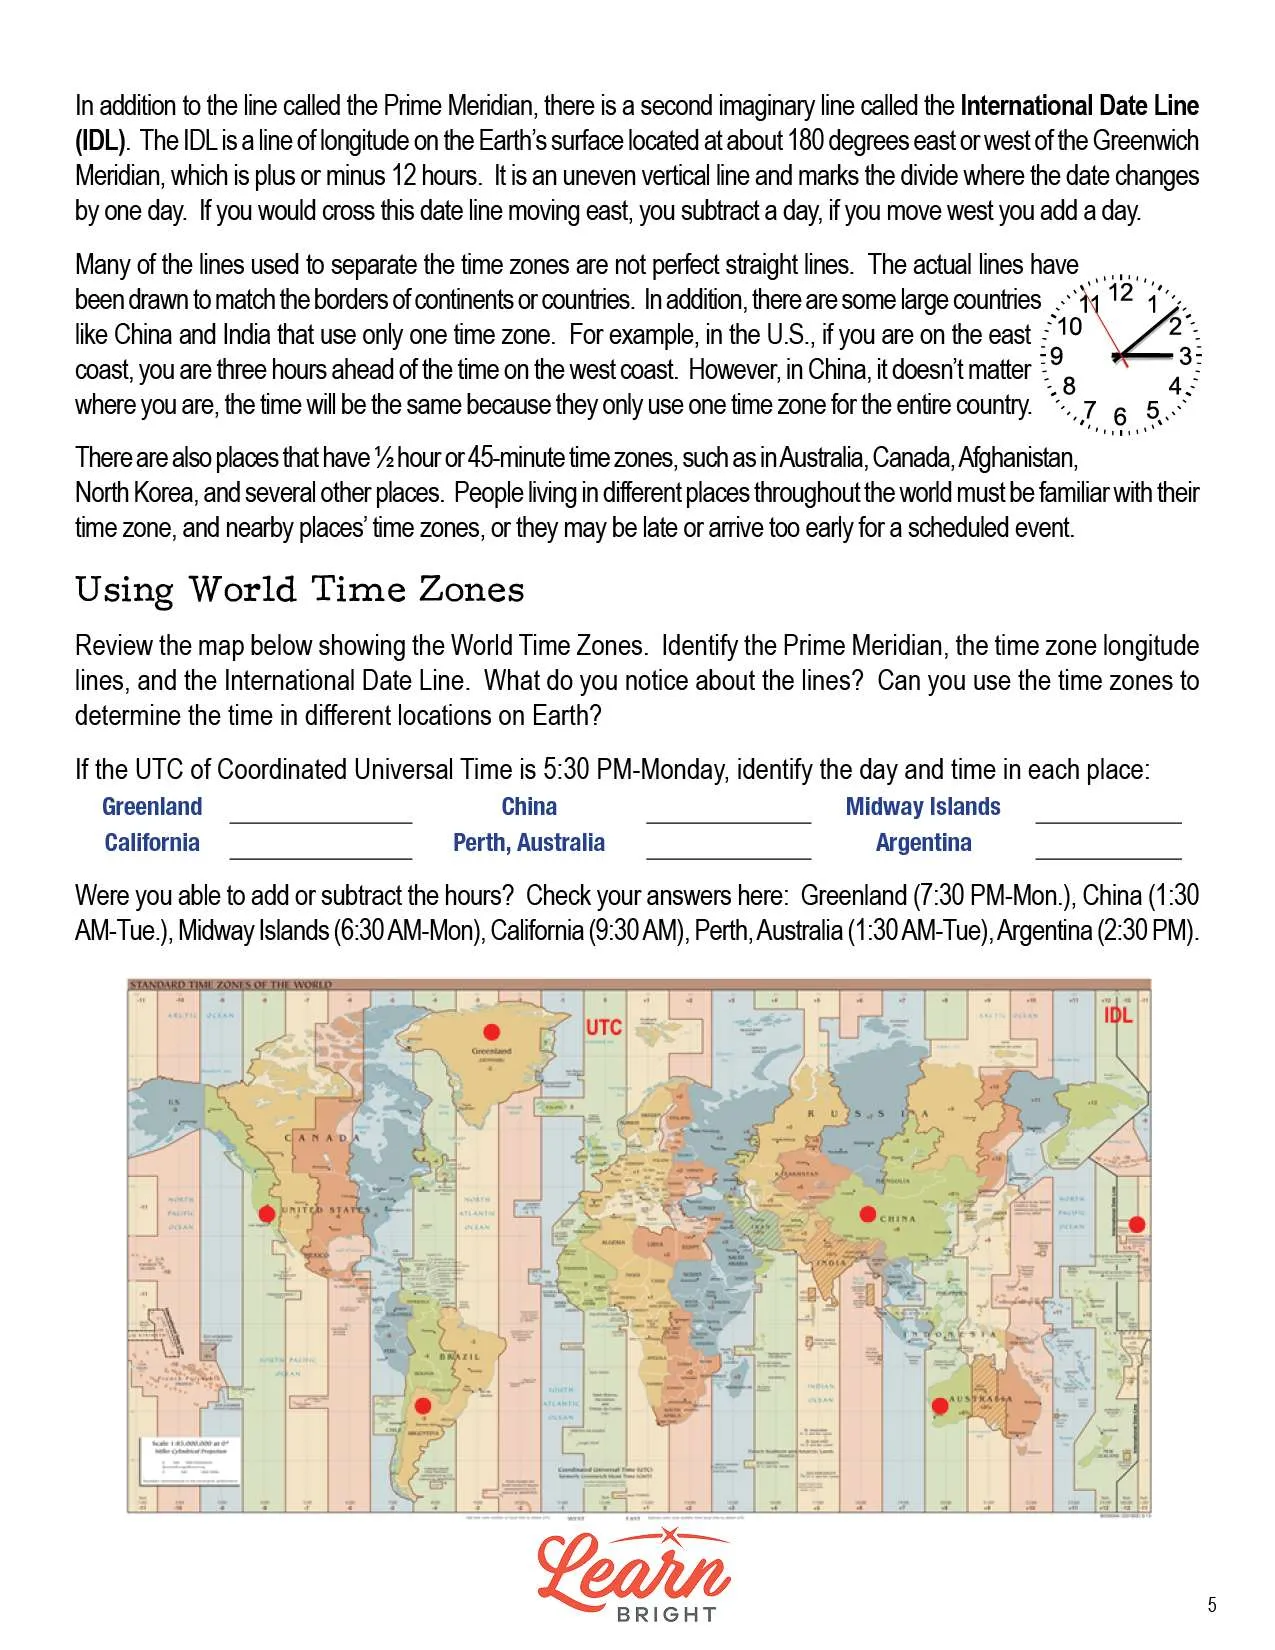 World Time Zones, Free PDF Download - Learn Bright